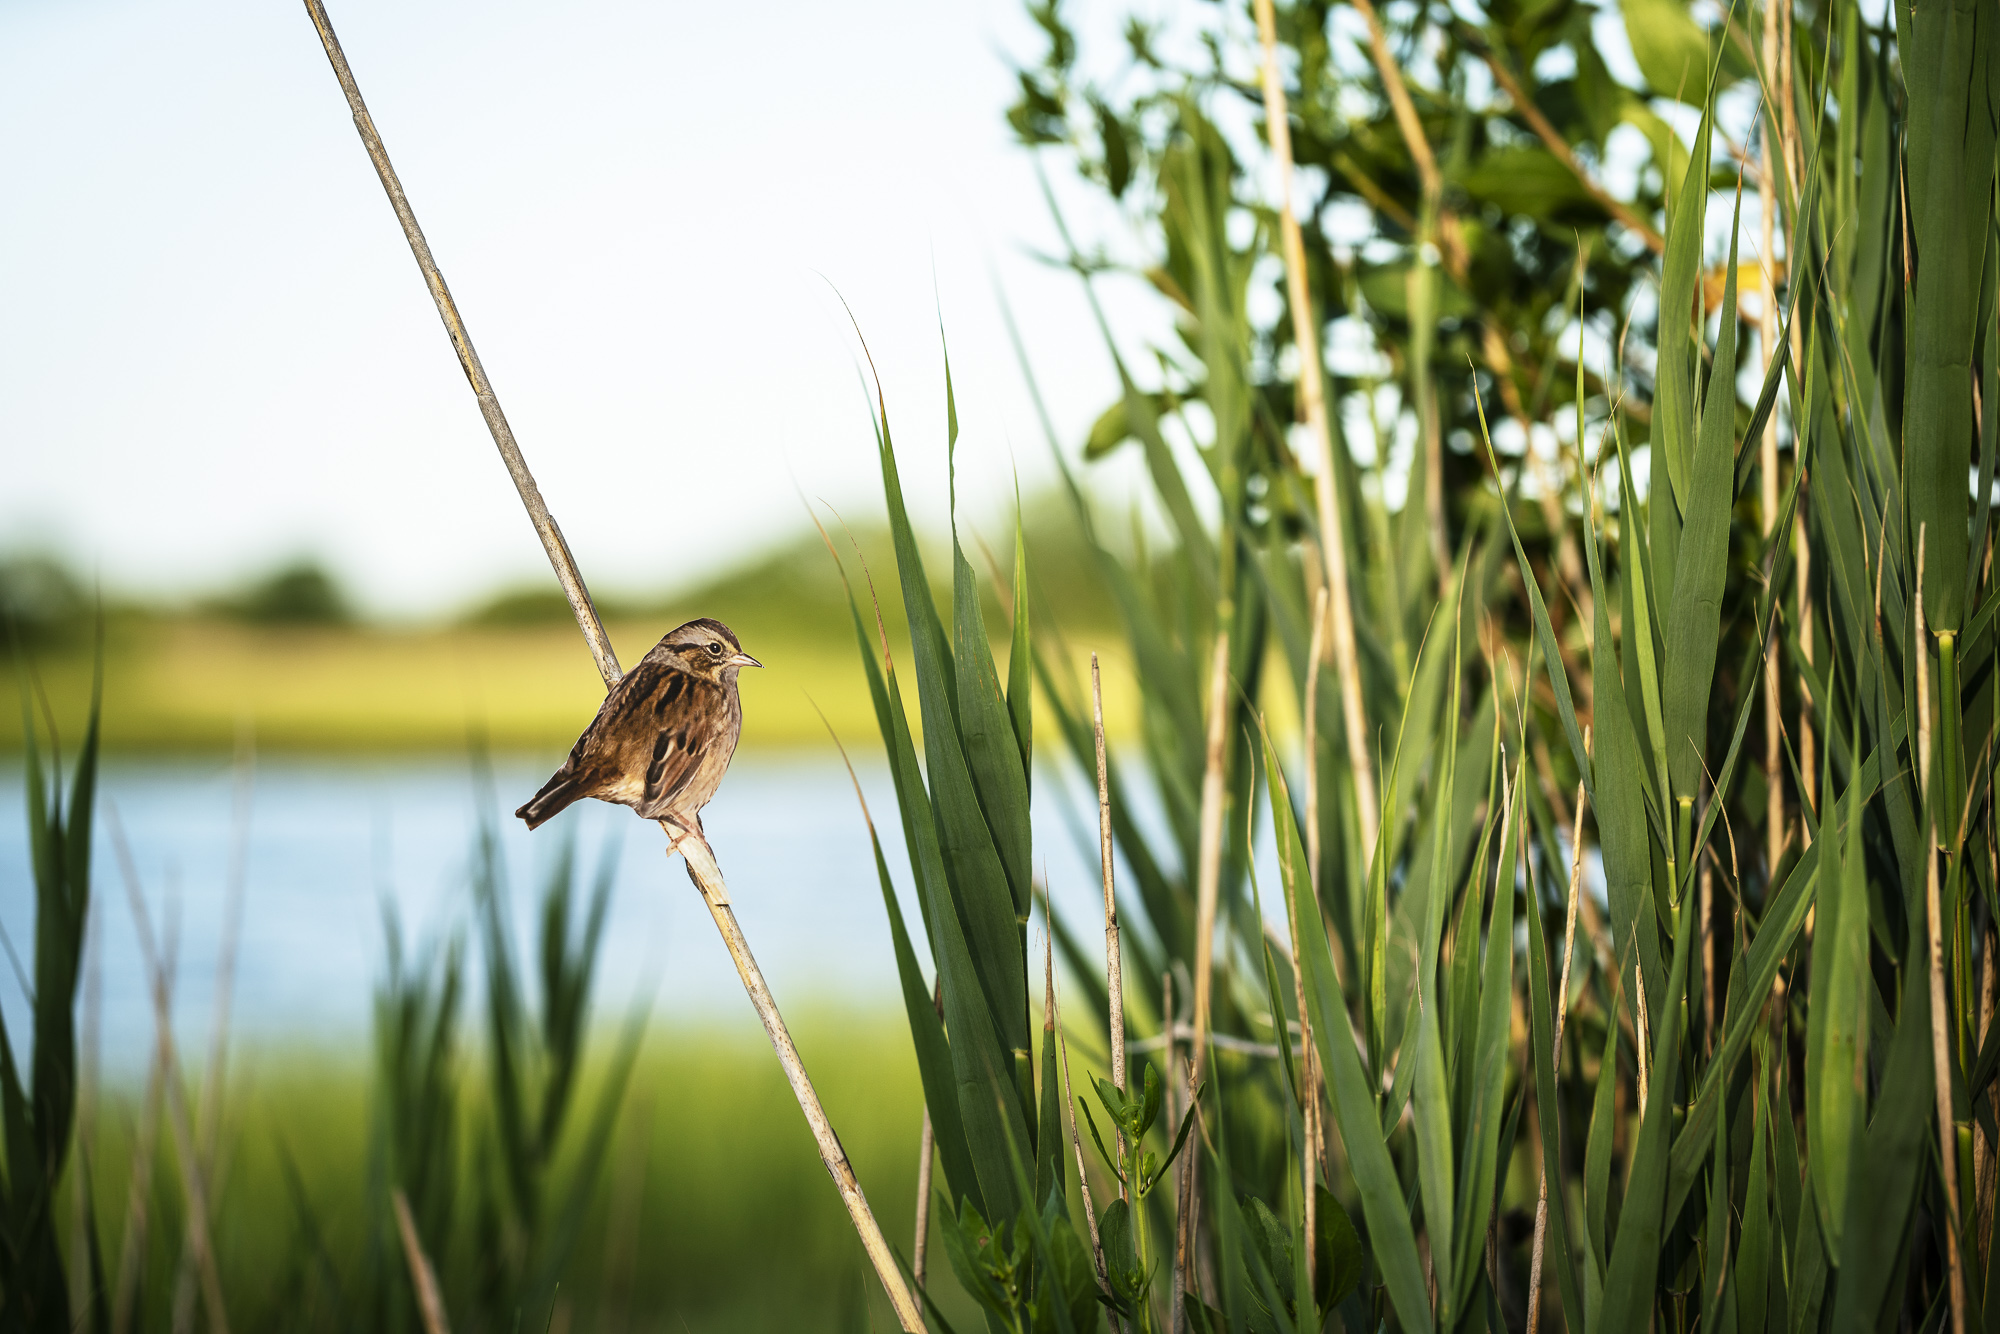 A paper cutout of a photograph of a Swamp Sparrow placed on a reed in a marsh with tall grasses and a river in the background.